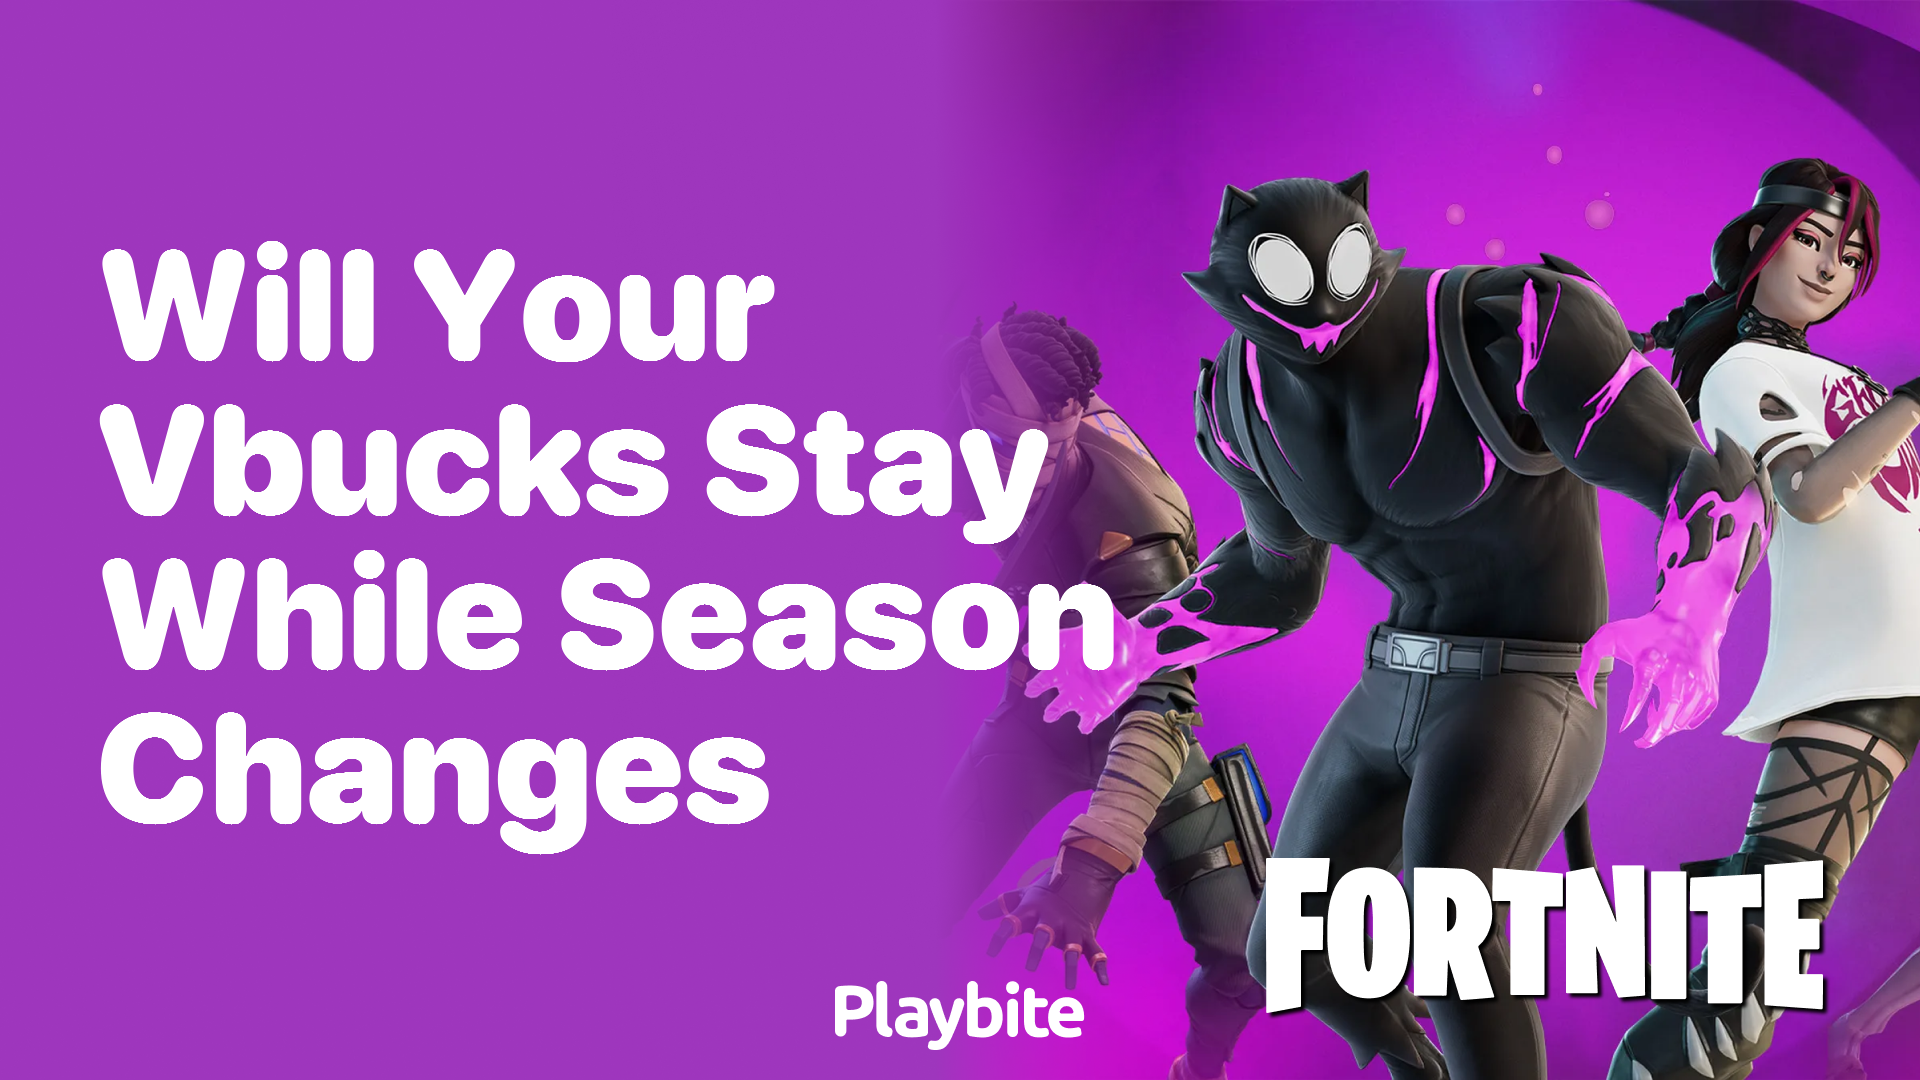 Will Your V-Bucks Stay When the Fortnite Season Changes?